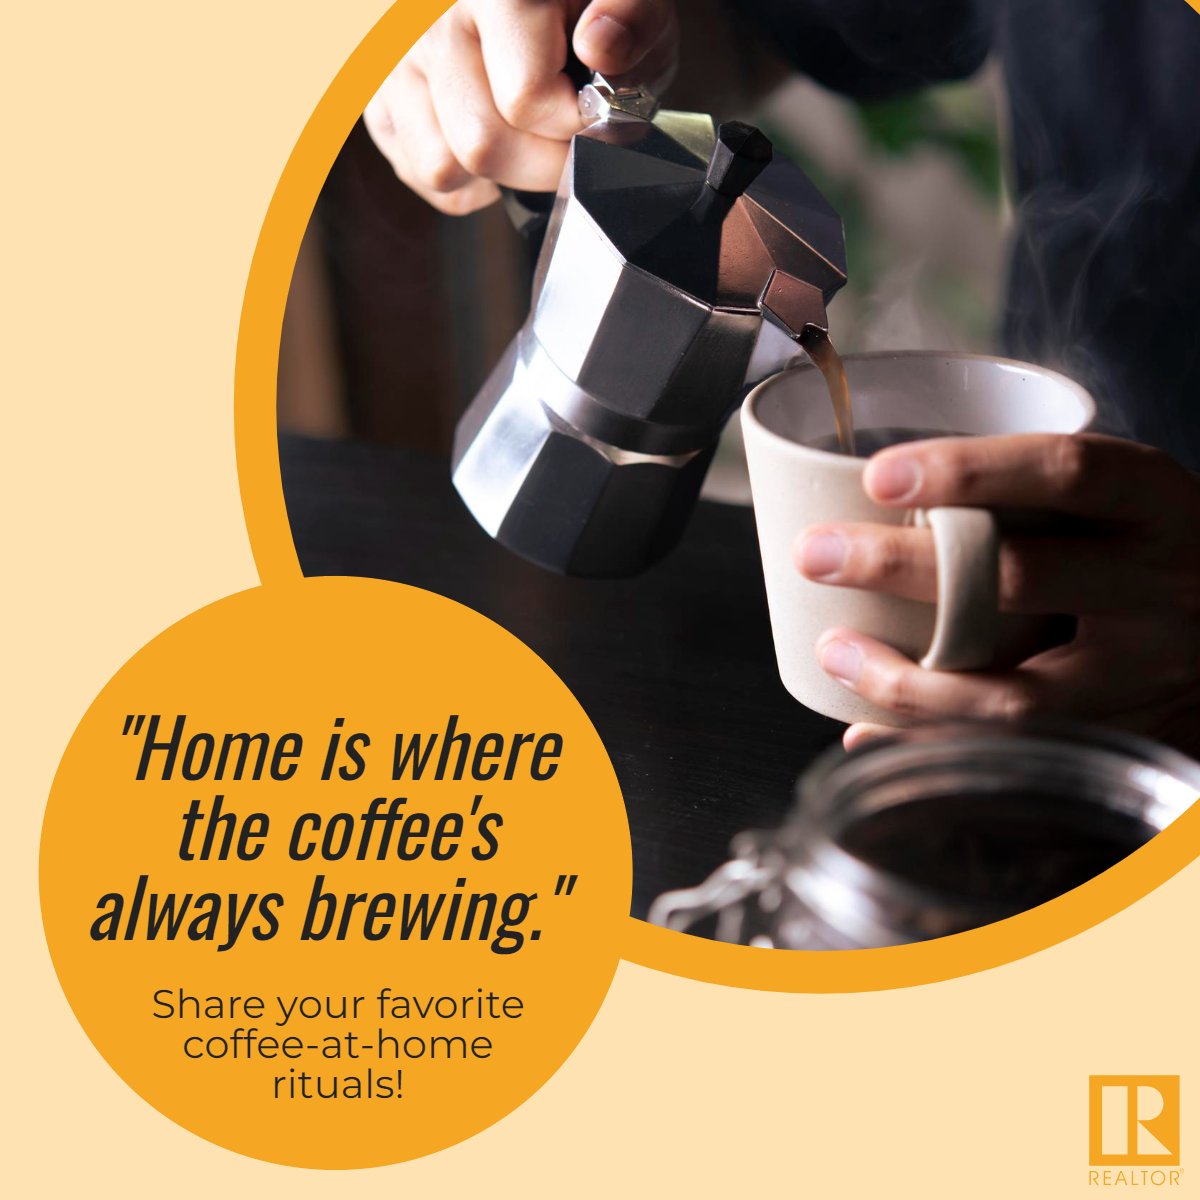 Are you a coffee lover? 

Share your at-home coffee rituals in the comments below!

#CoffeeLife #CoffeeLovers #Homeis
 #callniecie